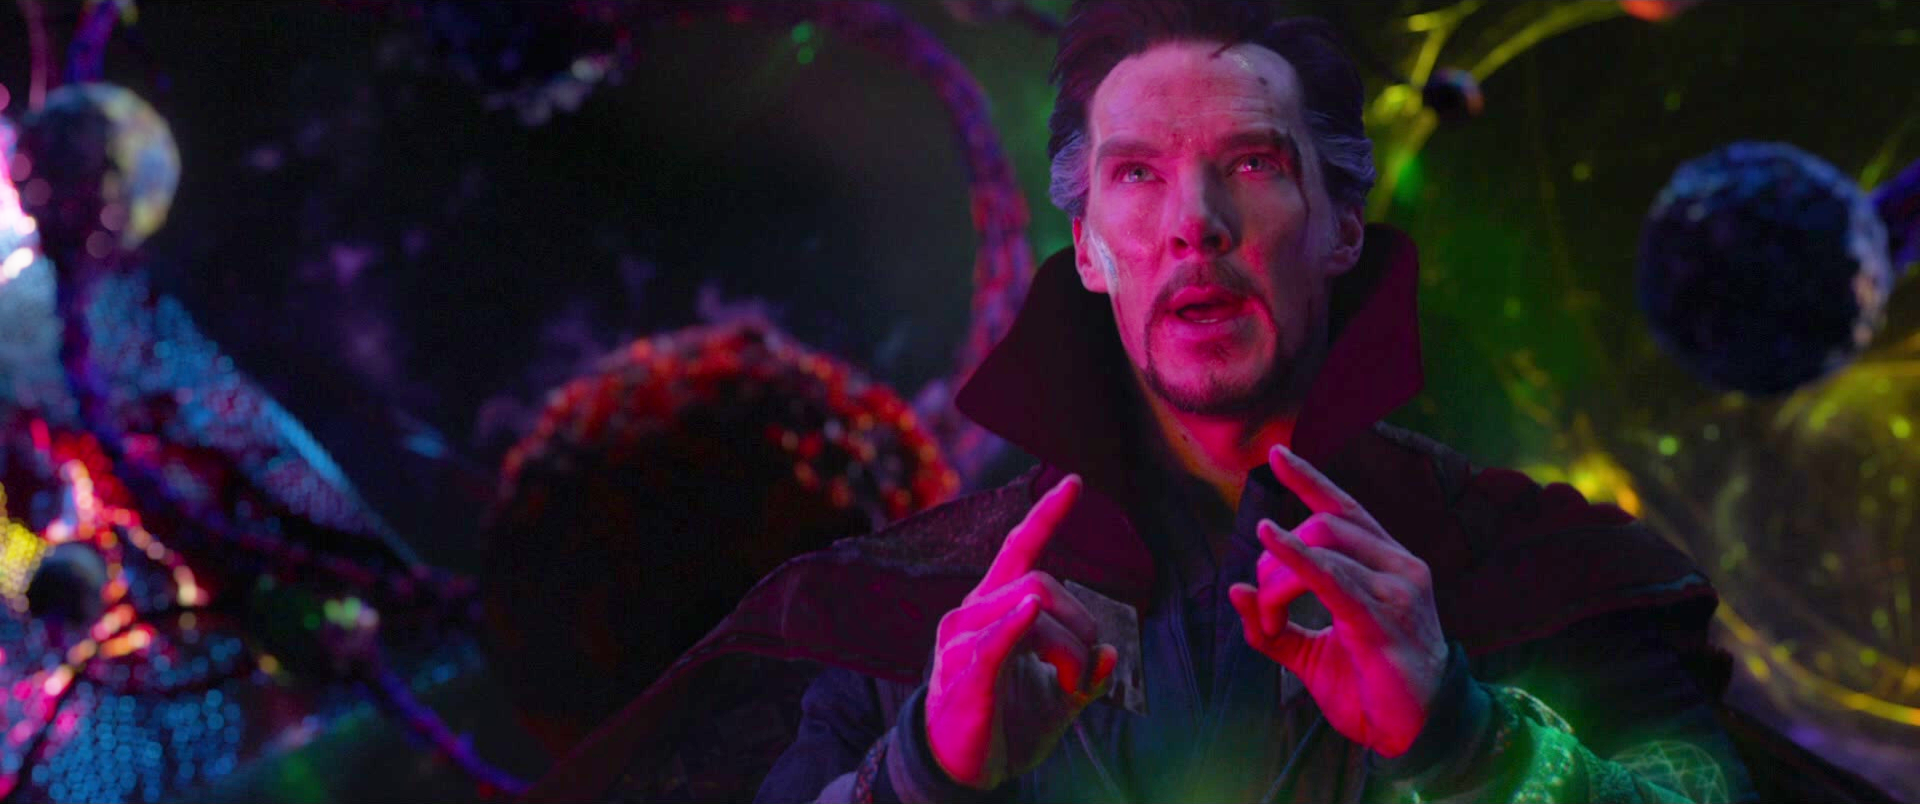 Doctor Strange (Benedict Cumberbatch) has come to make a deal in Doctor Strange (2016), Marvel Entertainment